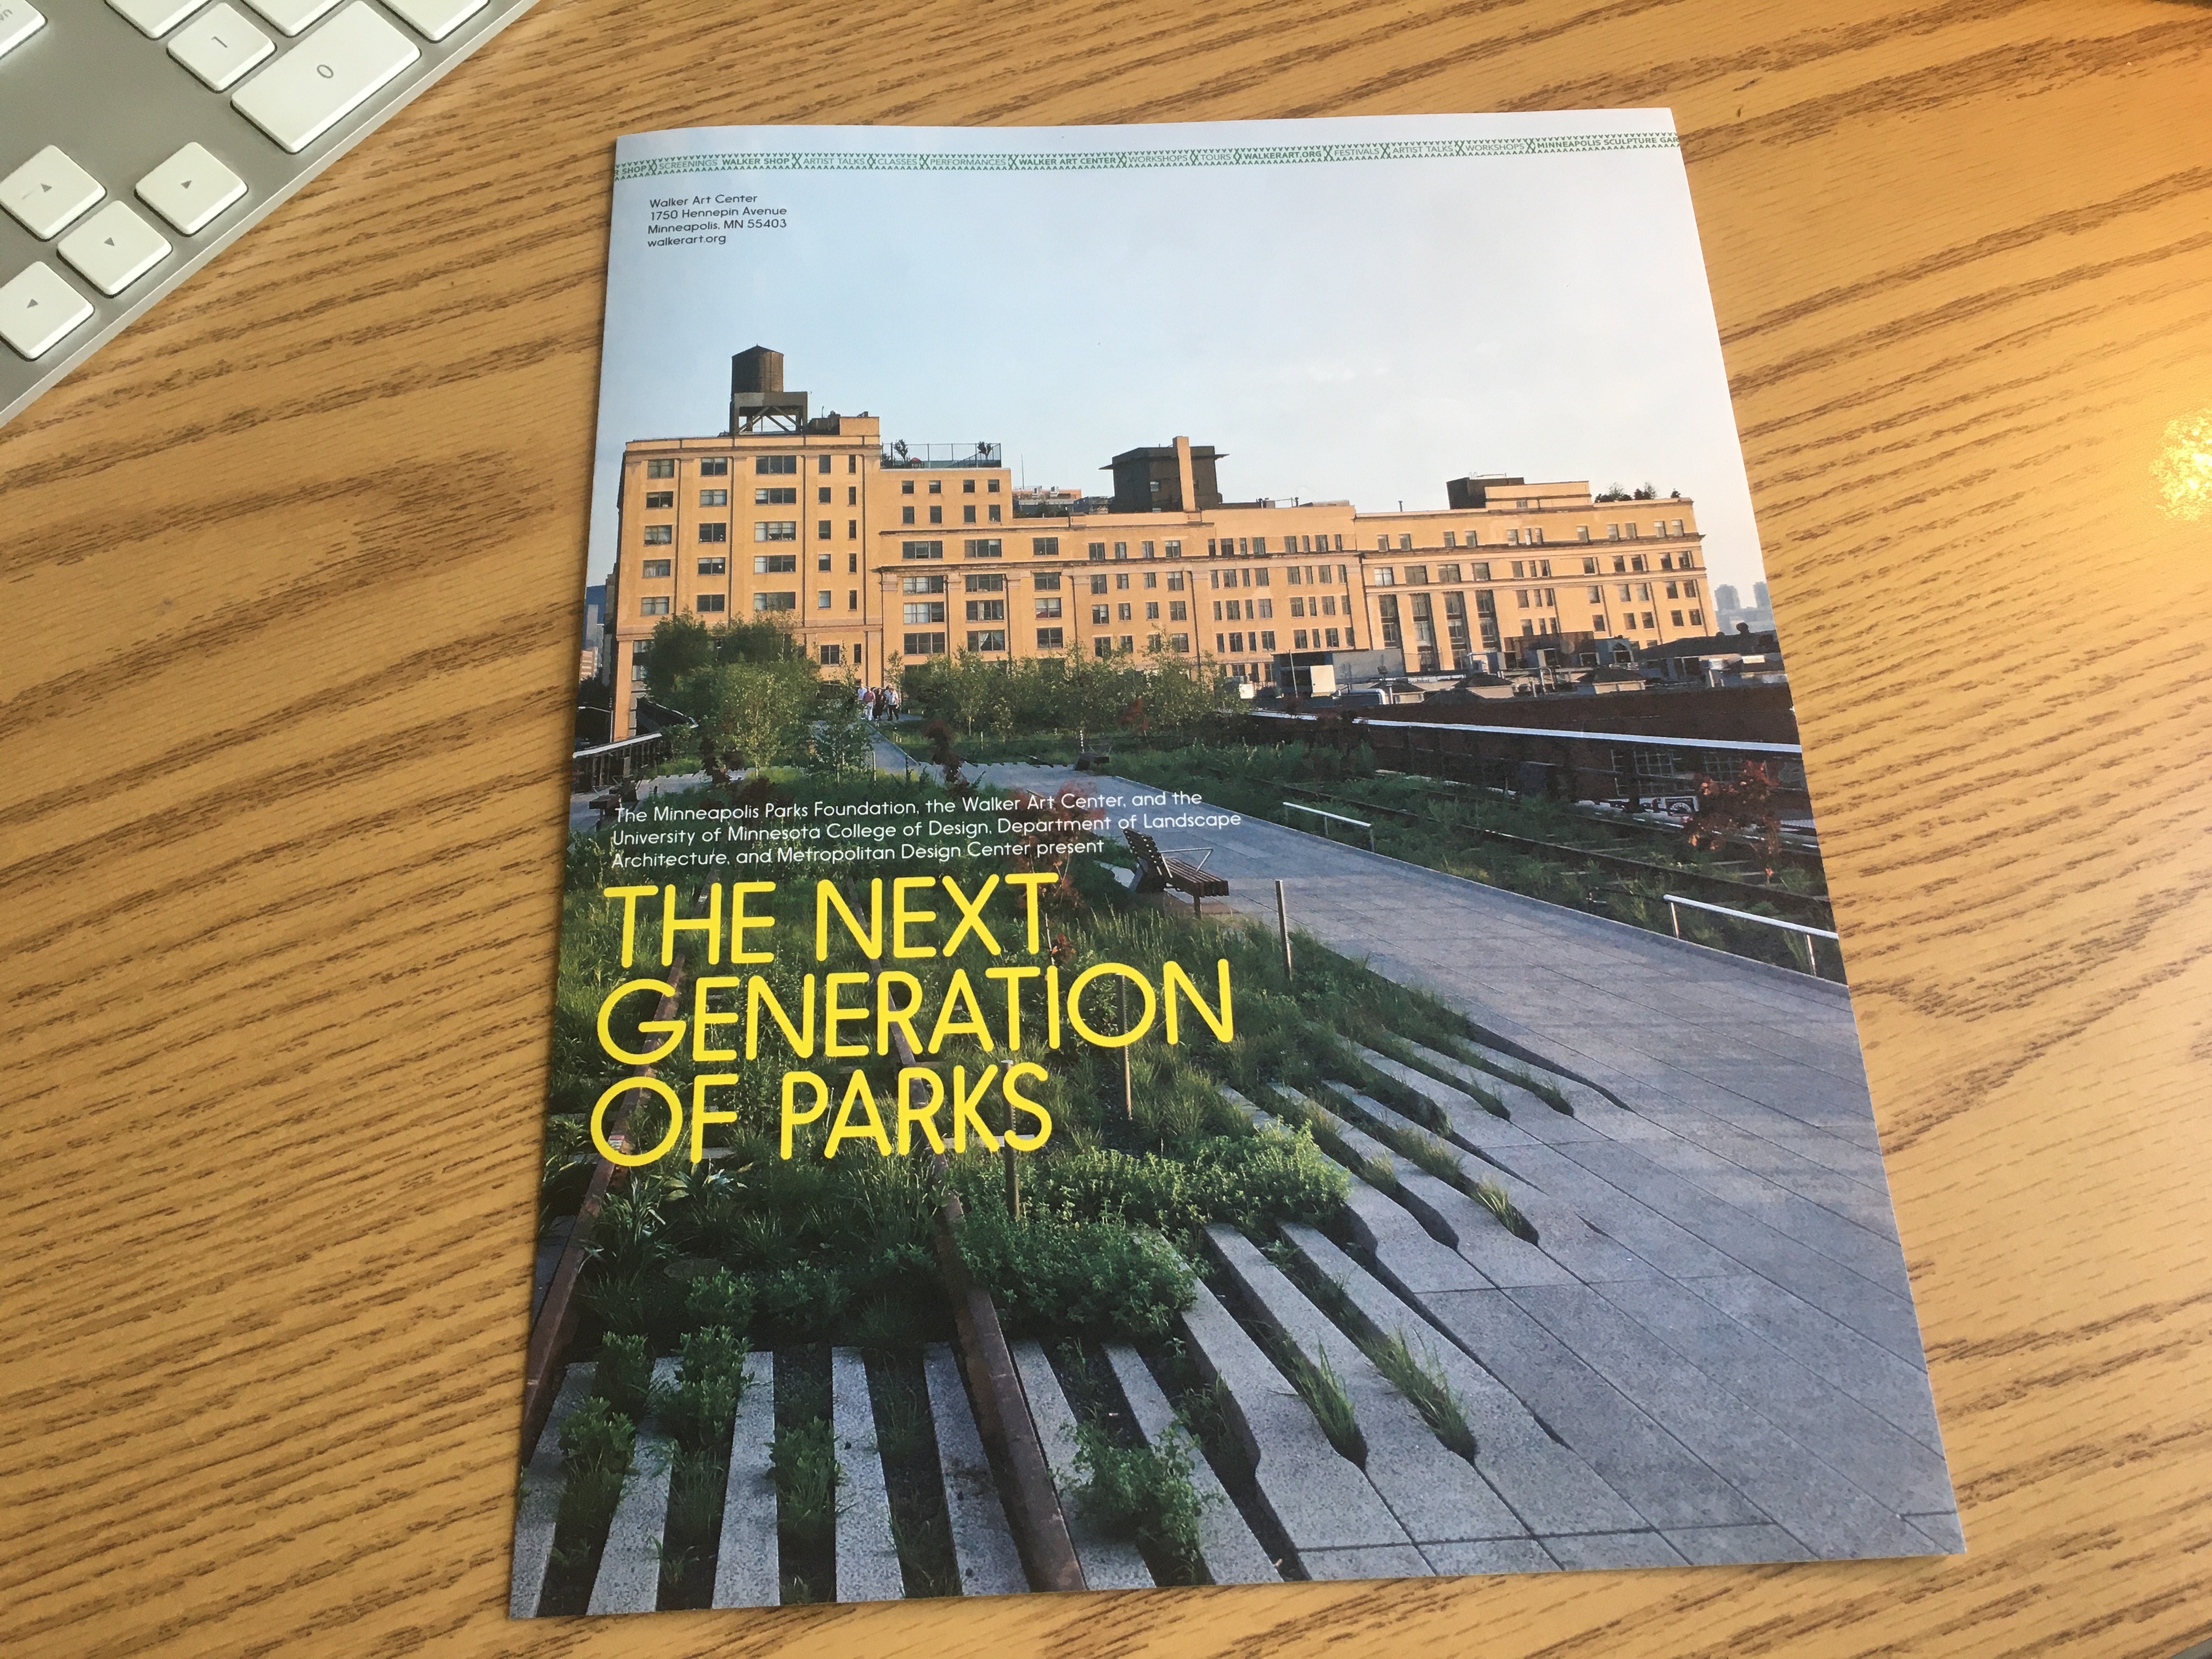 10 Years of Next Generation of Parks Events: In the Beginning, featuring Cecily Hines